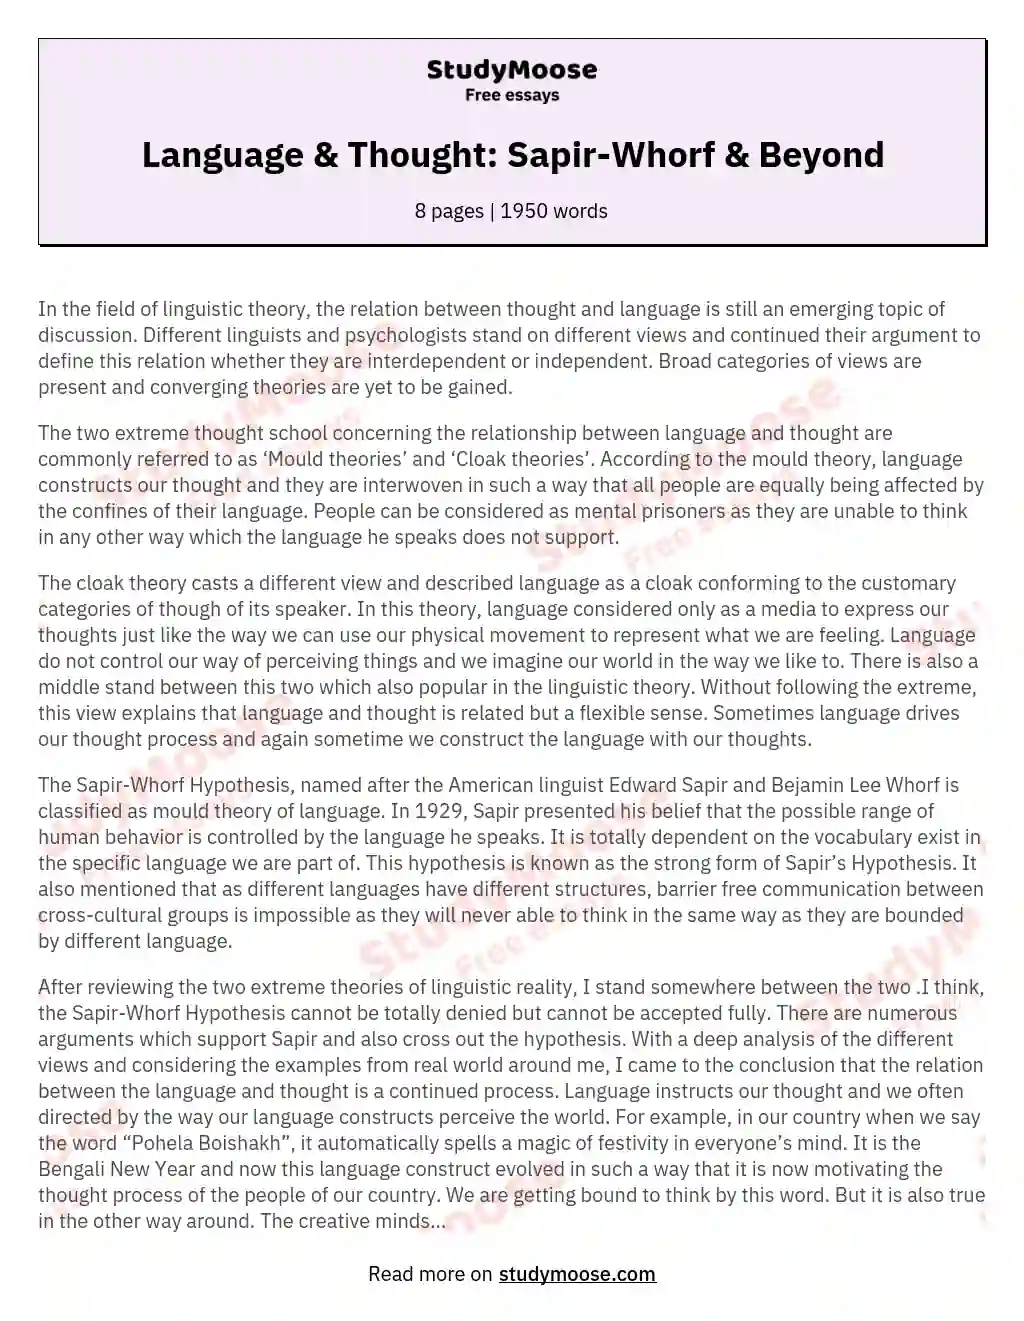 language and thought essay